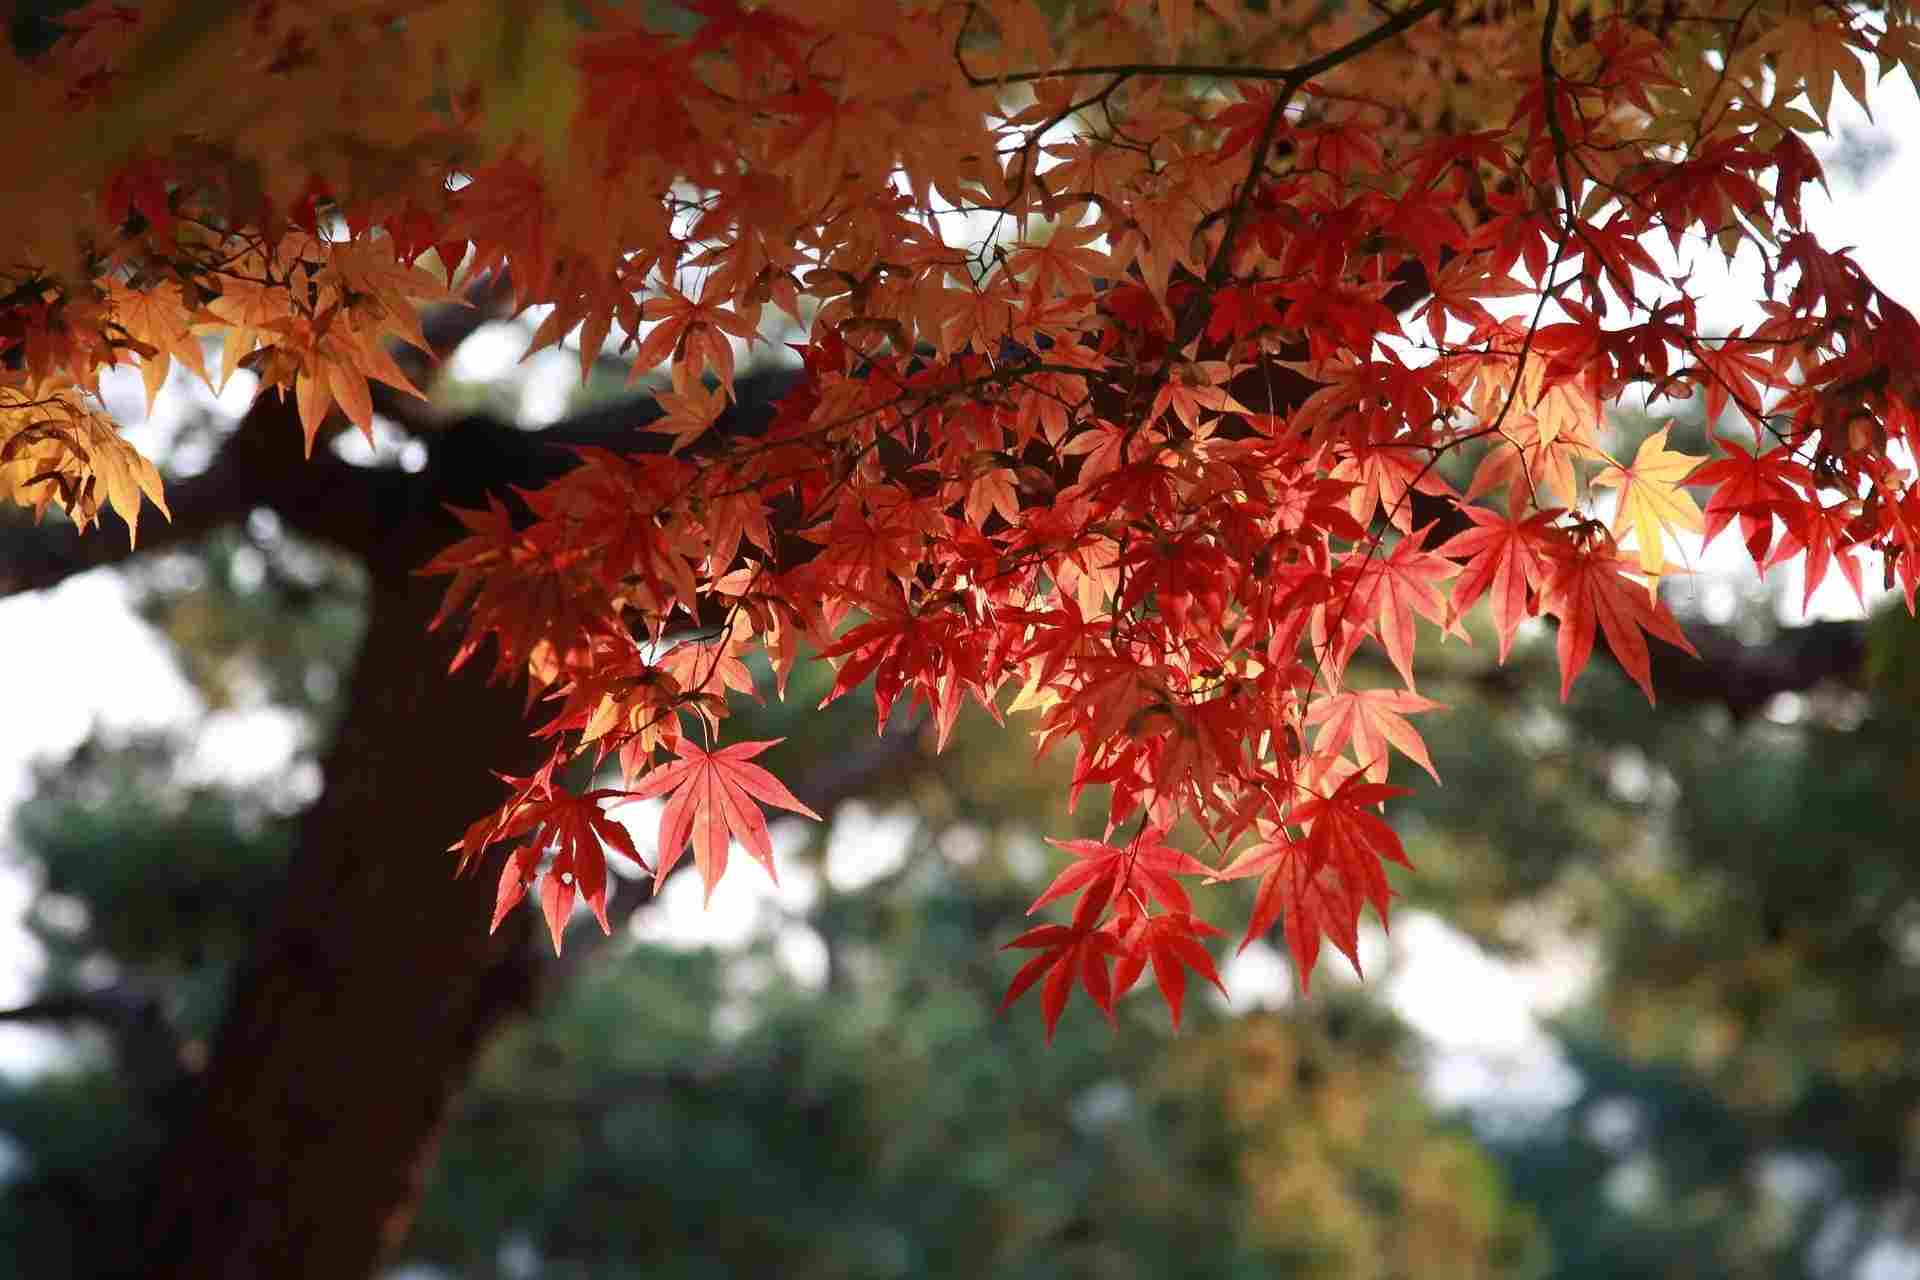 The fall foliage is extremely beautiful on these large trees, which need well-drained fertile soil, although they can survive through drought soil conditions.